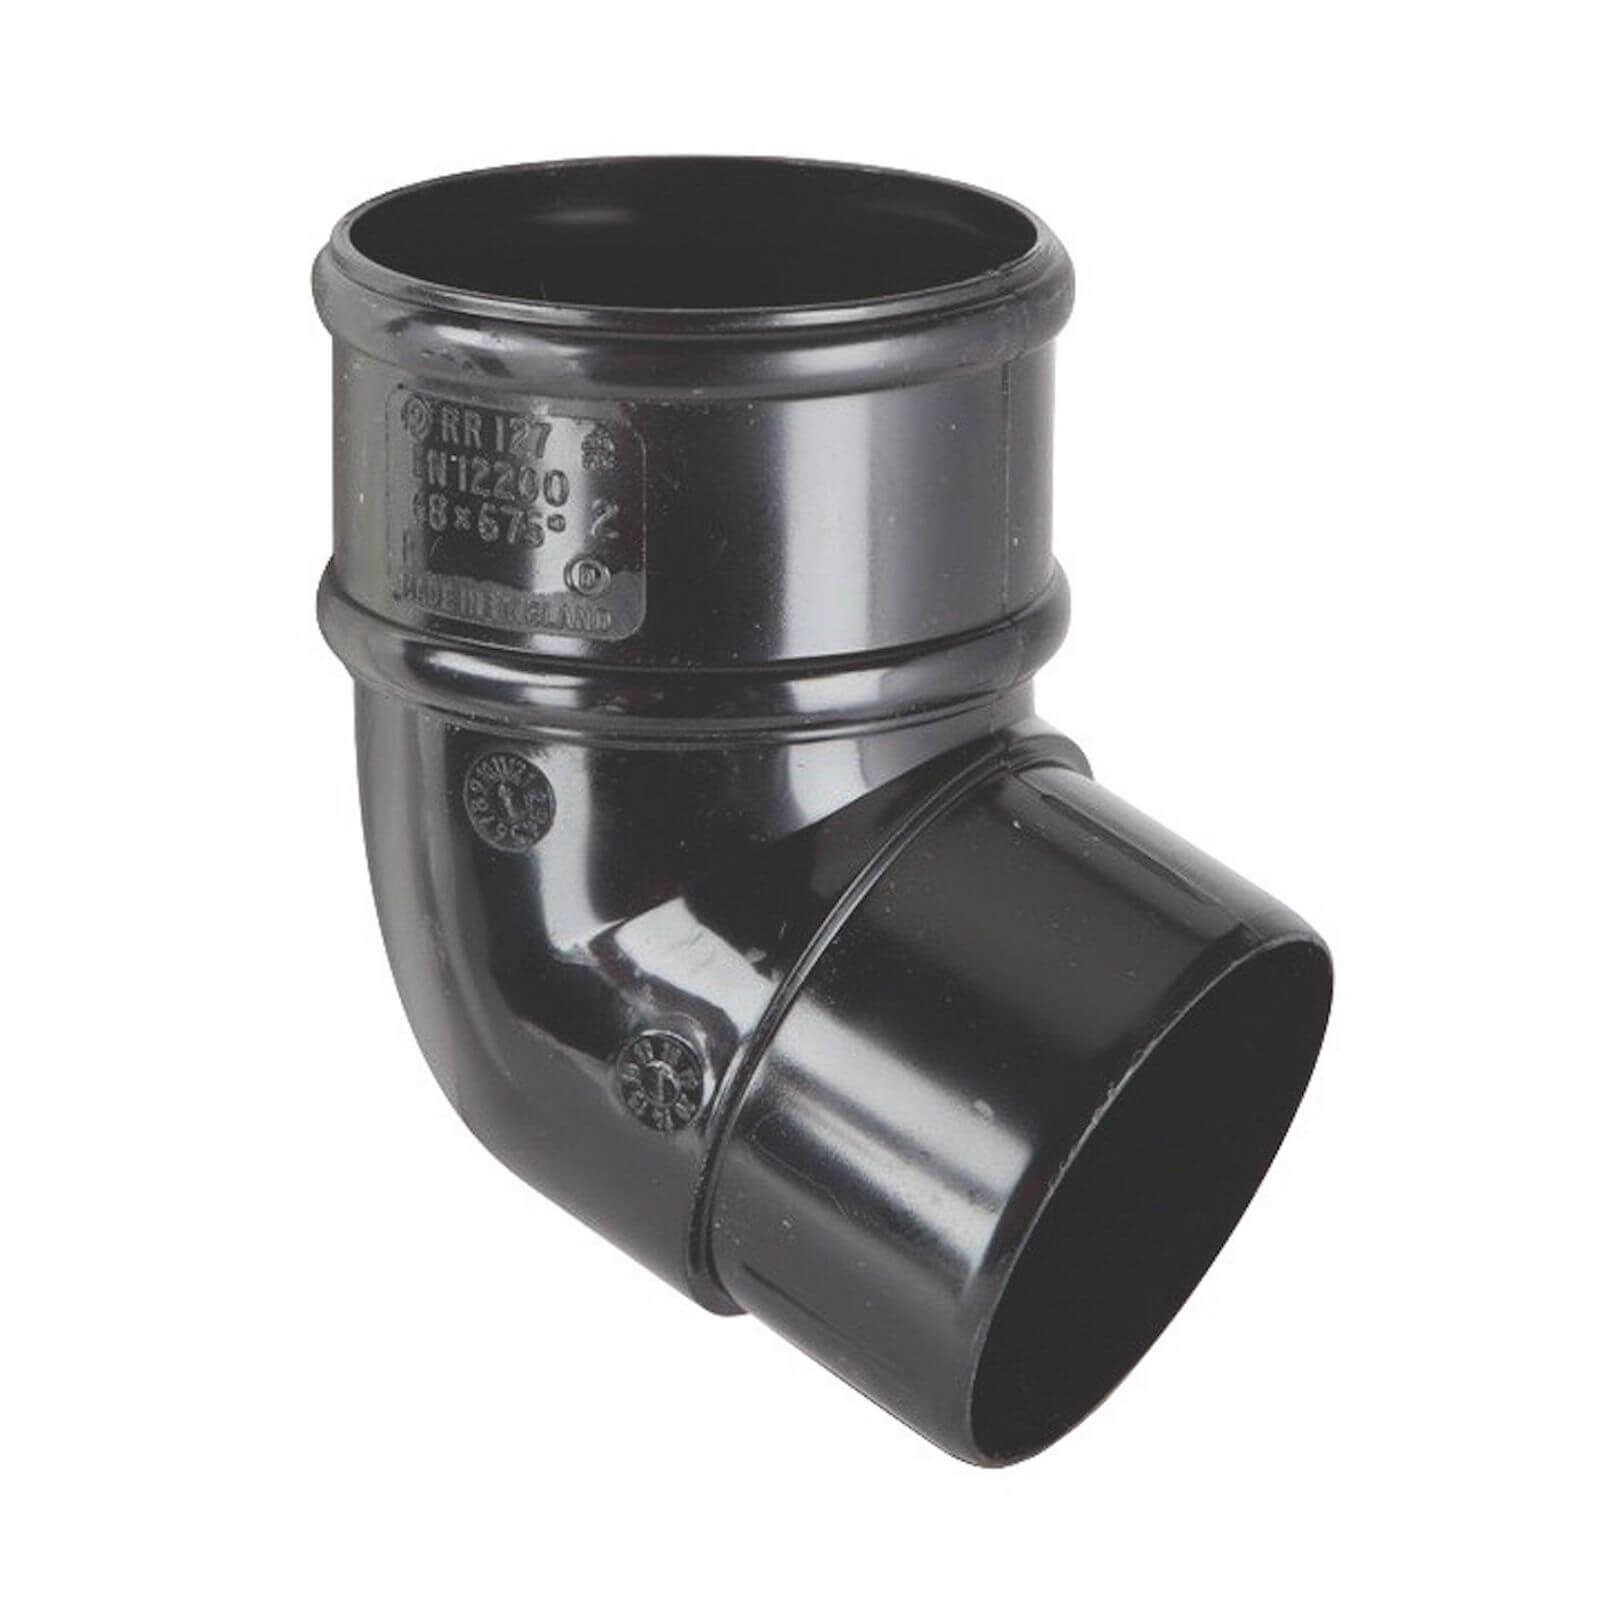 Photo of Polypipe Downpipe Offset Bend - 68mm X 112.5 Degree - Black